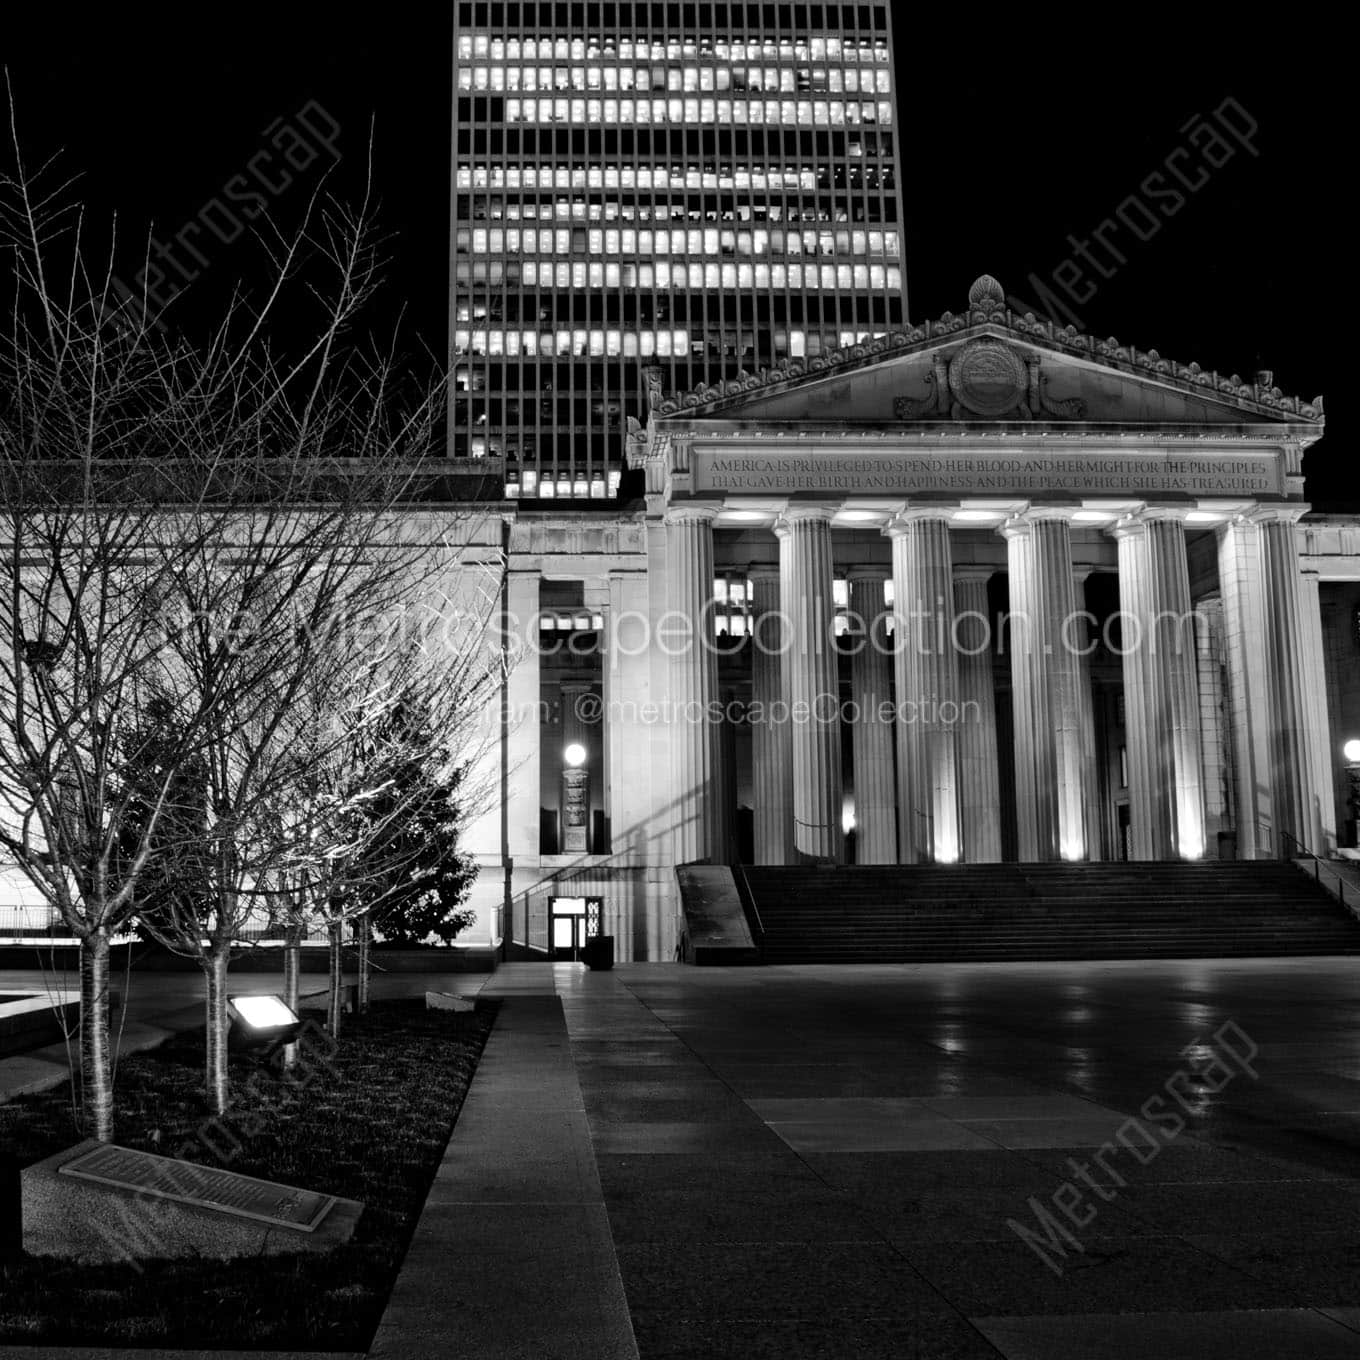 victory park at night Black & White Office Art